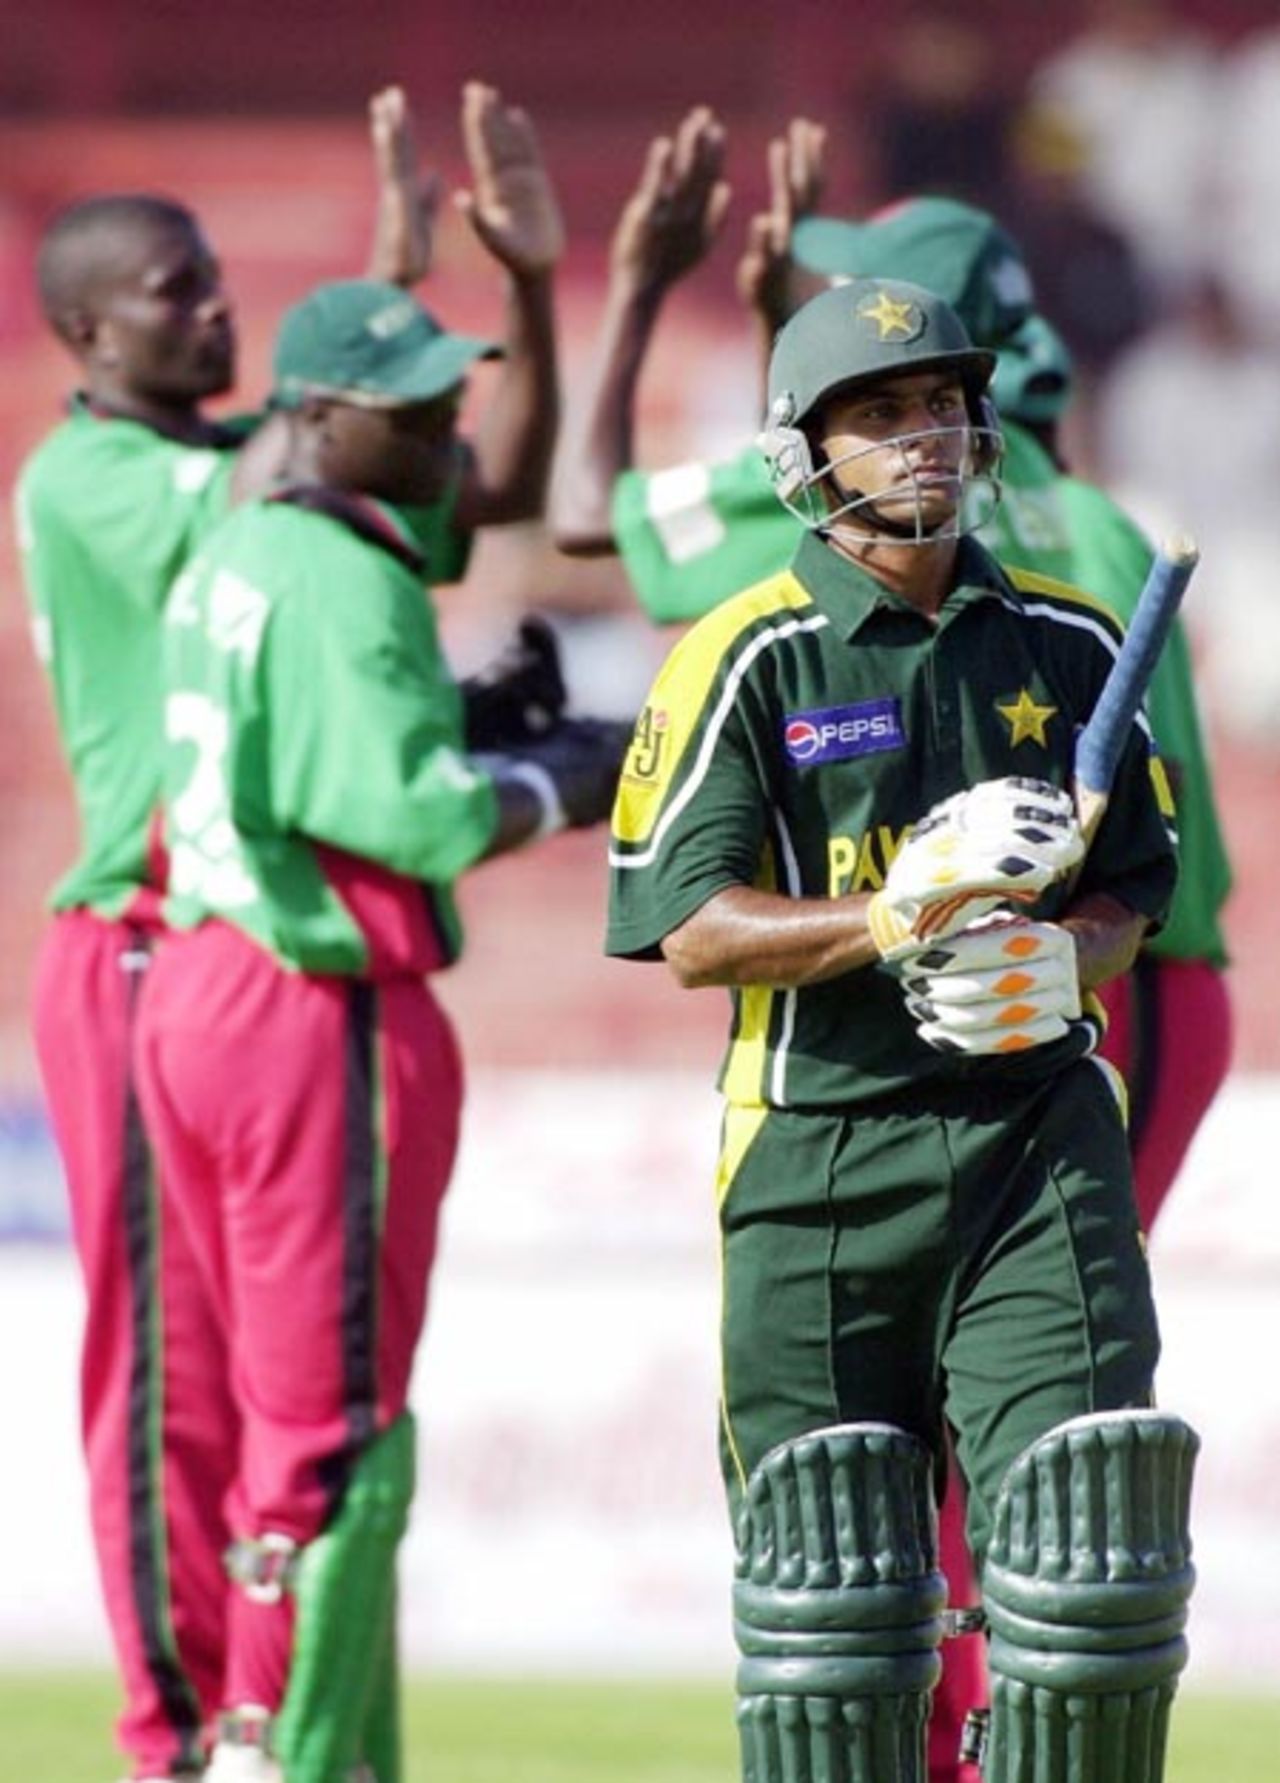 Kenyan team (L) celebrate the dismissal of Pakistani opener Muhammad Hafeez, caught out by Kennedy Obuya off Peter Ongondo, during the last match of the Four Nation Sharjah Cricket Tournament, 08 April 2003.